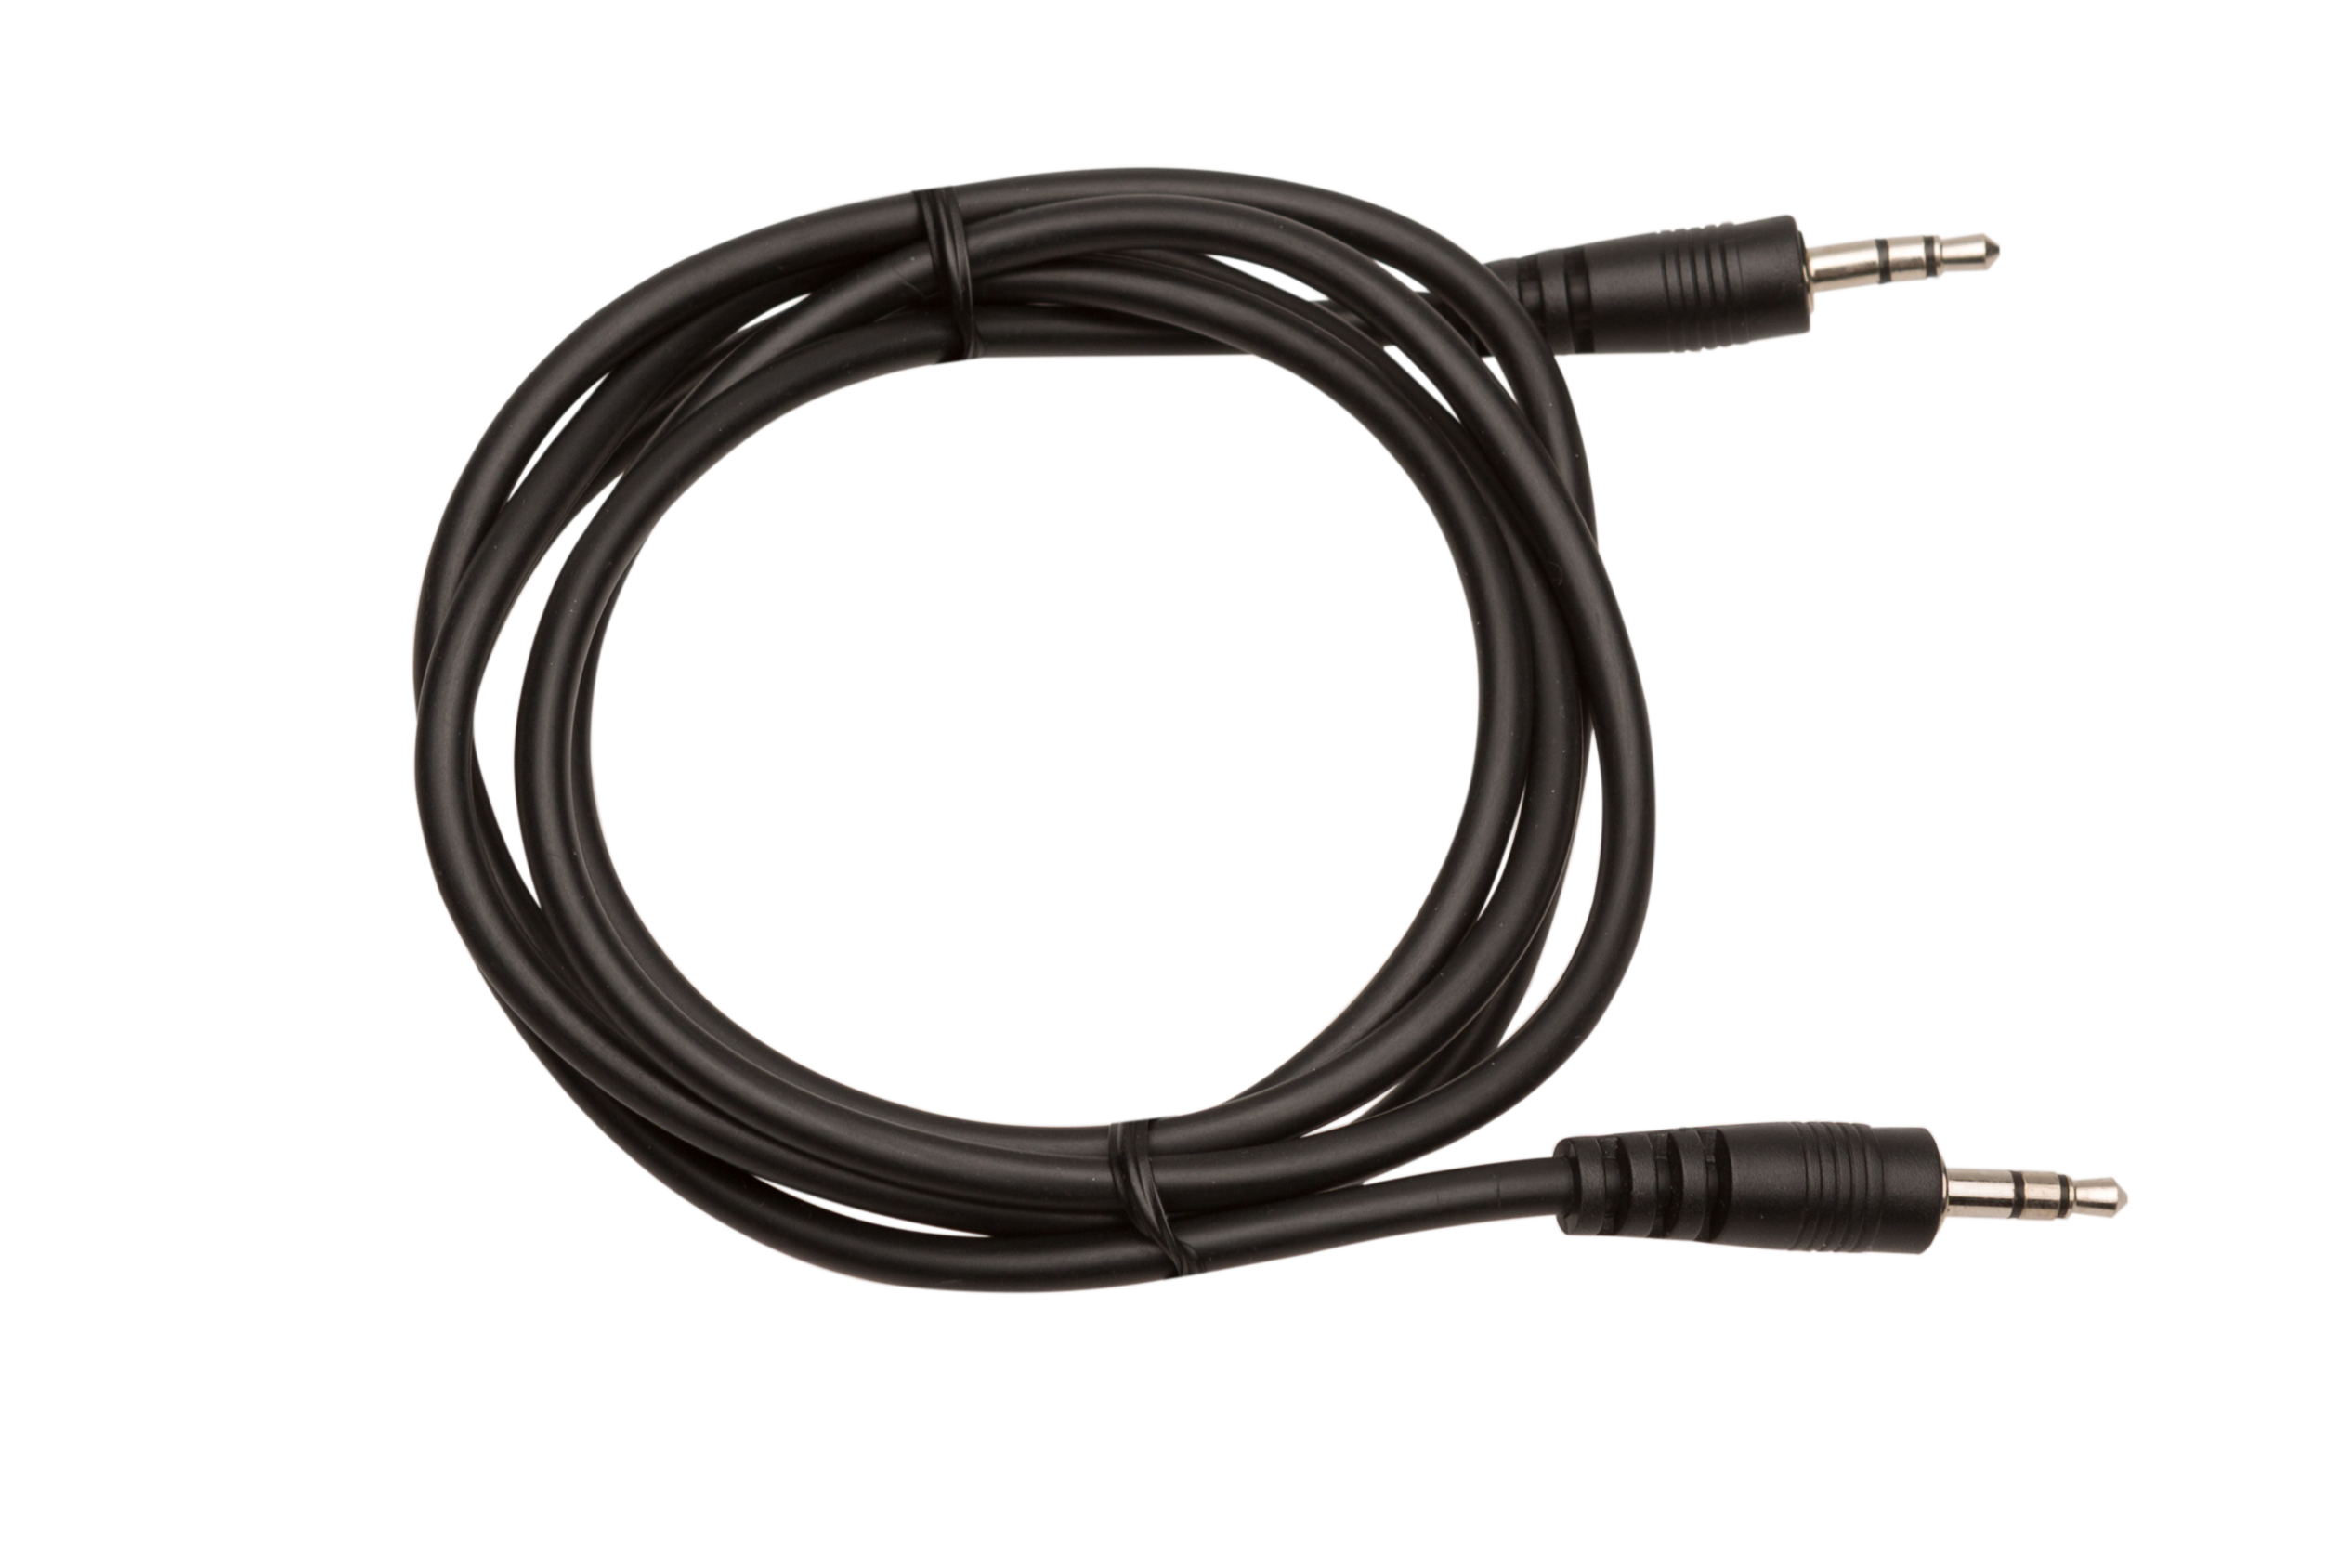 /axitour-axiwi-ca-002-audio-connection-cable